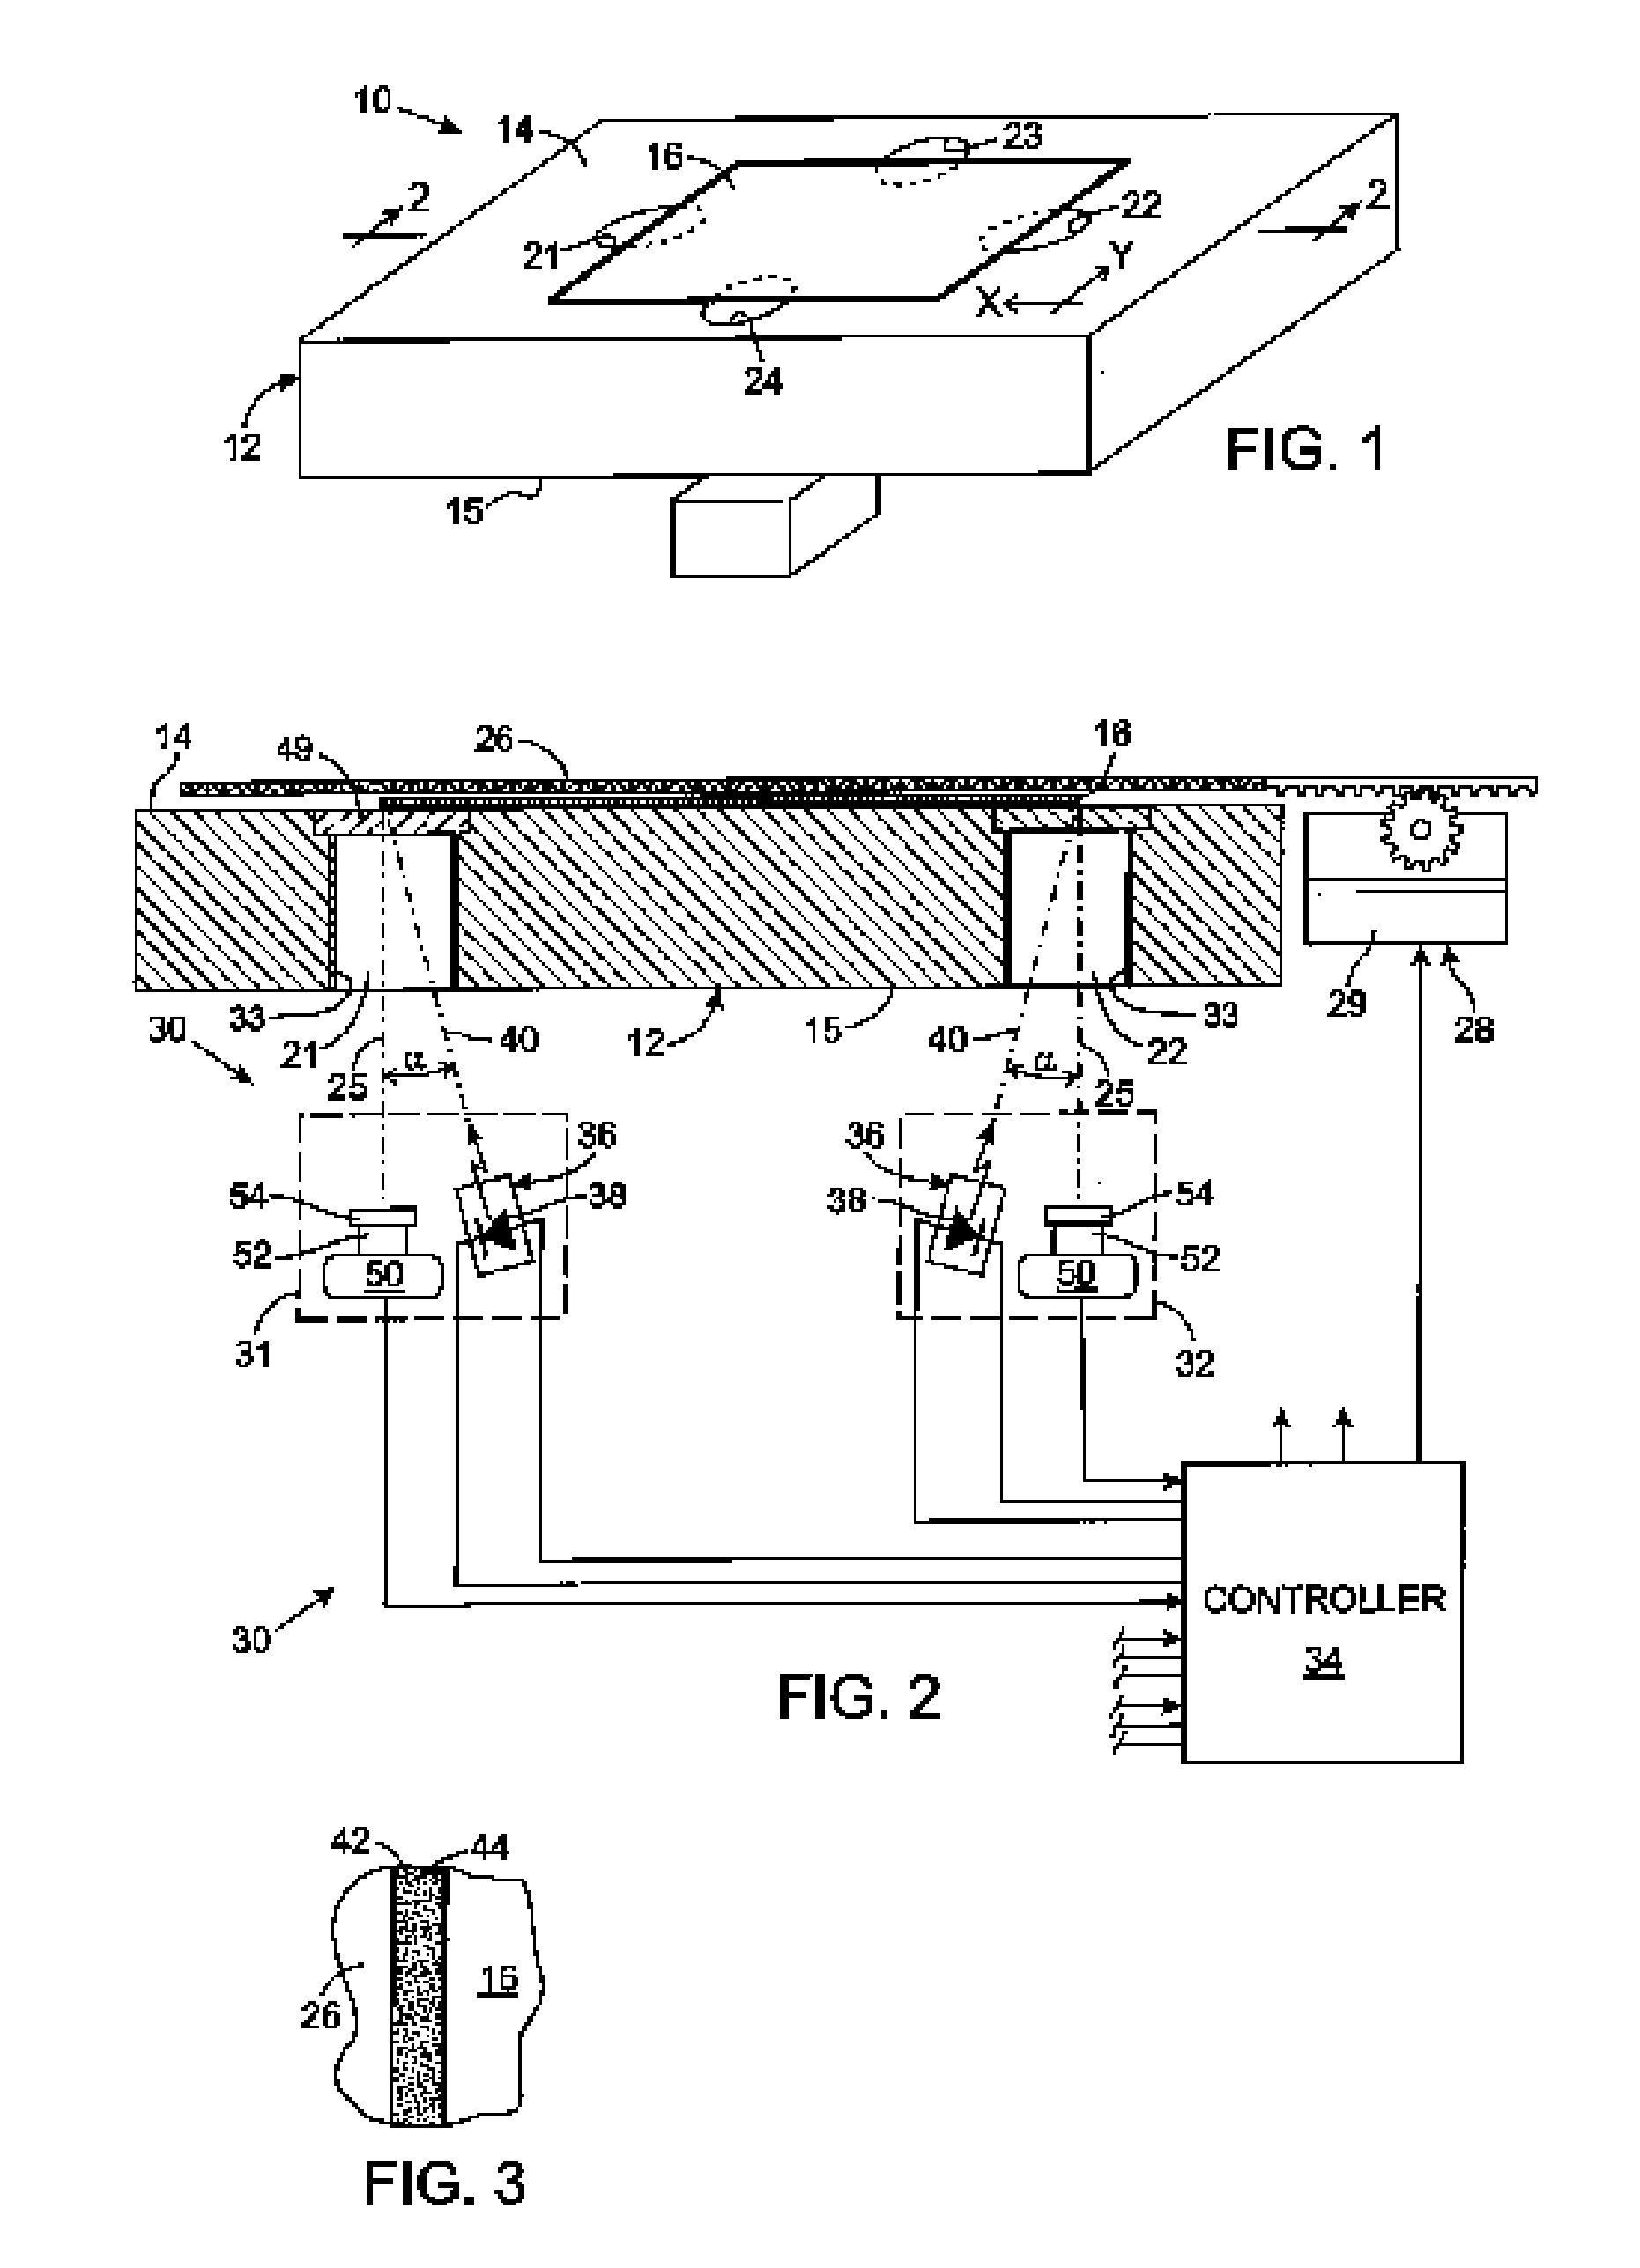 Direct illumination machine vision technique for processing semiconductor wafers